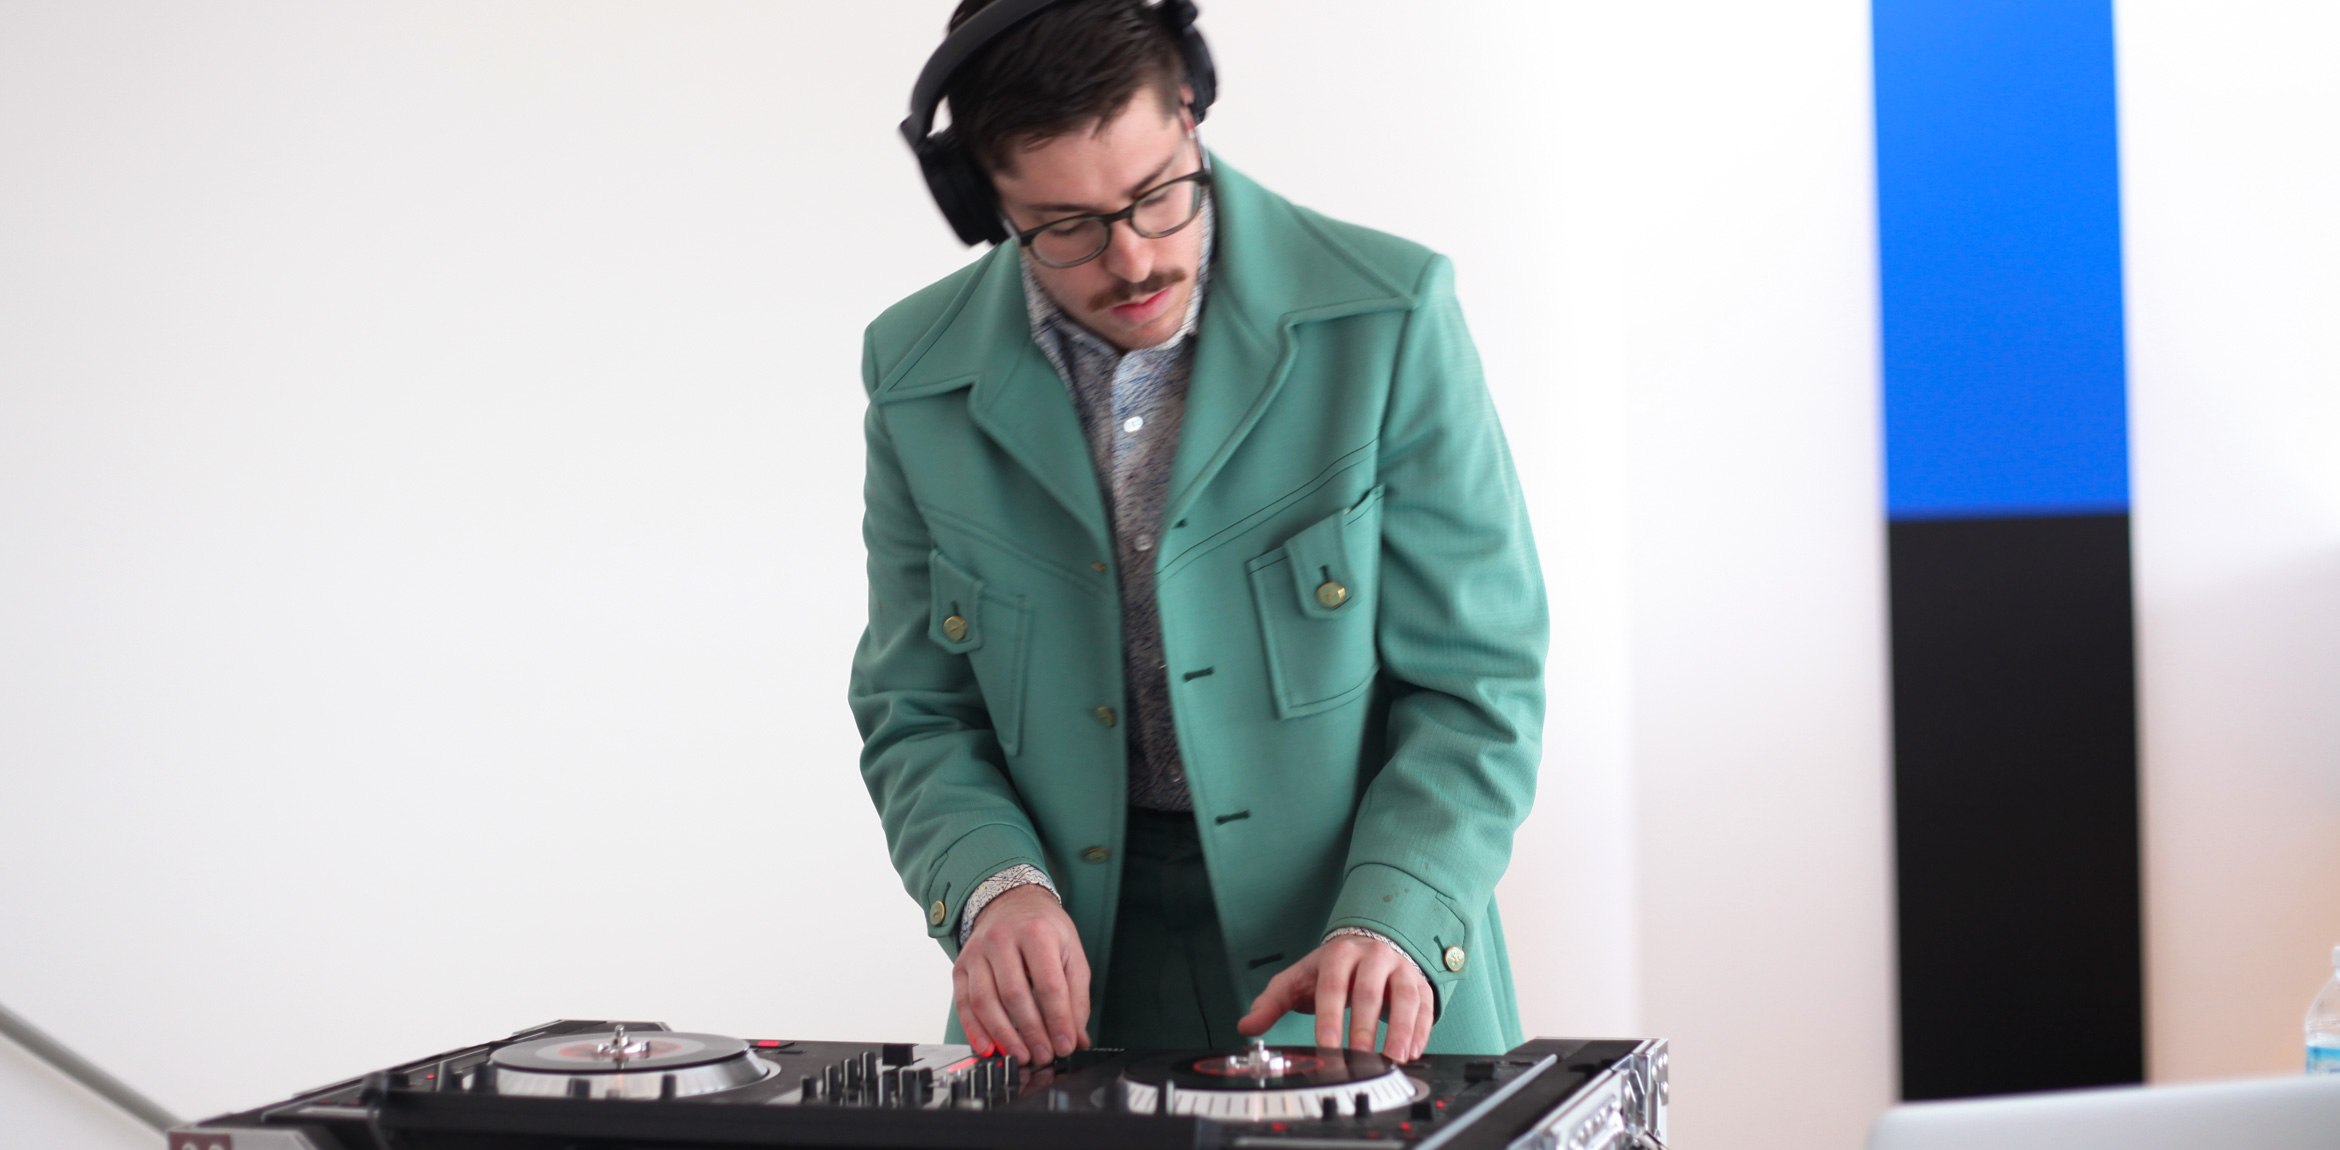 A DJ mixing at a turntable in the main gallery, with "Blue Black" by Ellsworth Kelly in the background.